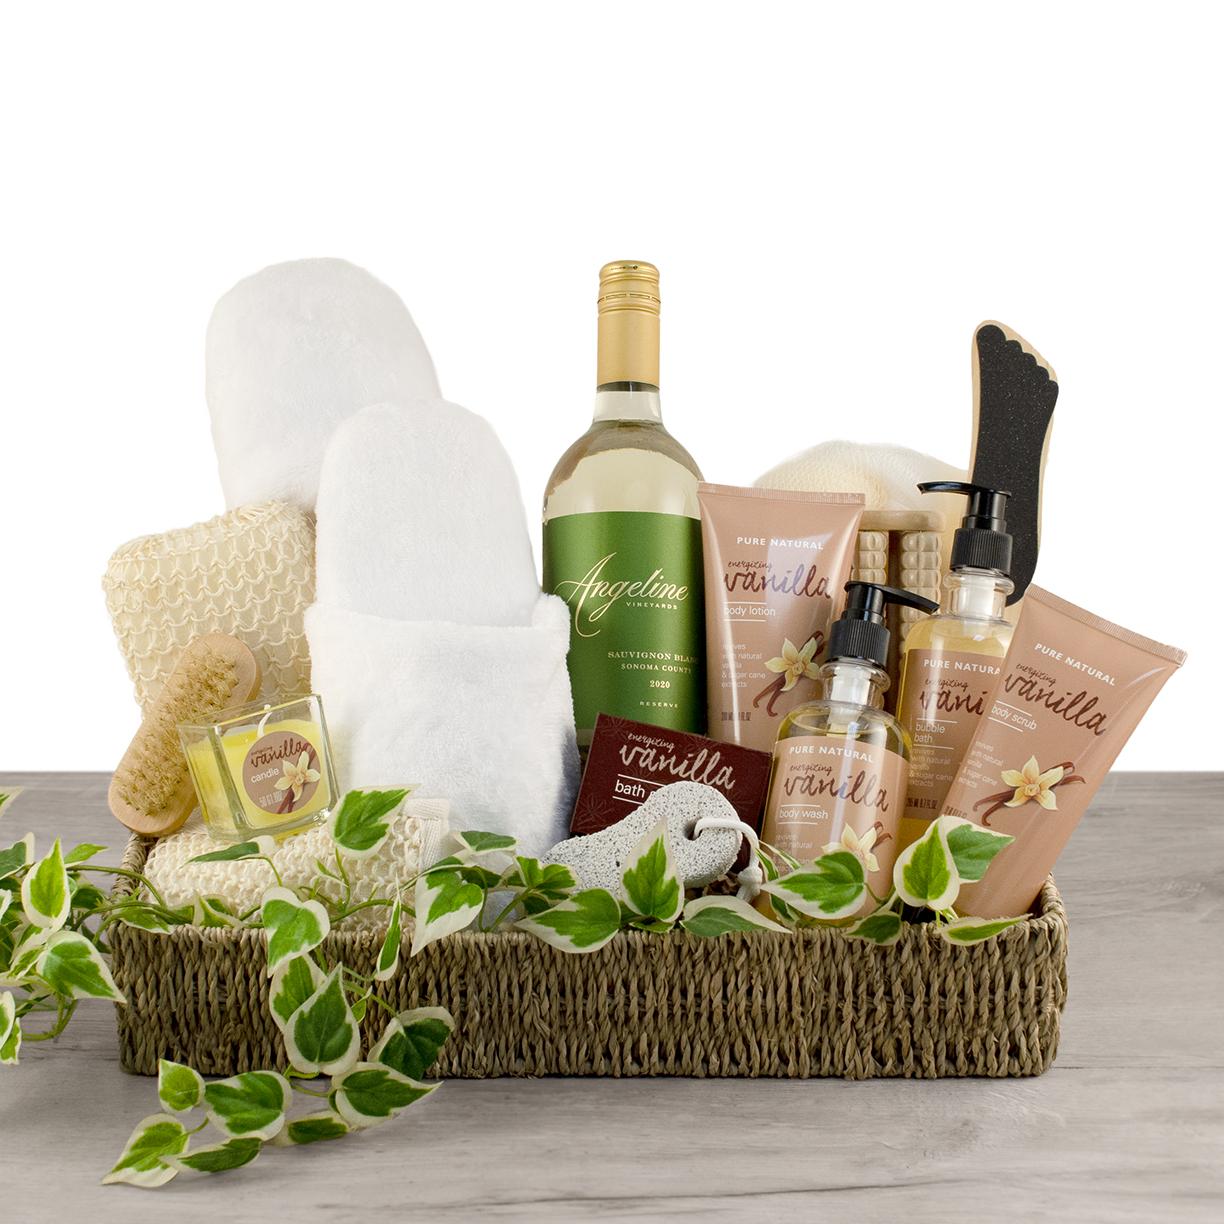 Essential Home Spa & White Wine Gift Basket By Wine Basket , White Wine Gift Baskets , Spa Gift Baskets , Gift Baskets Delivered